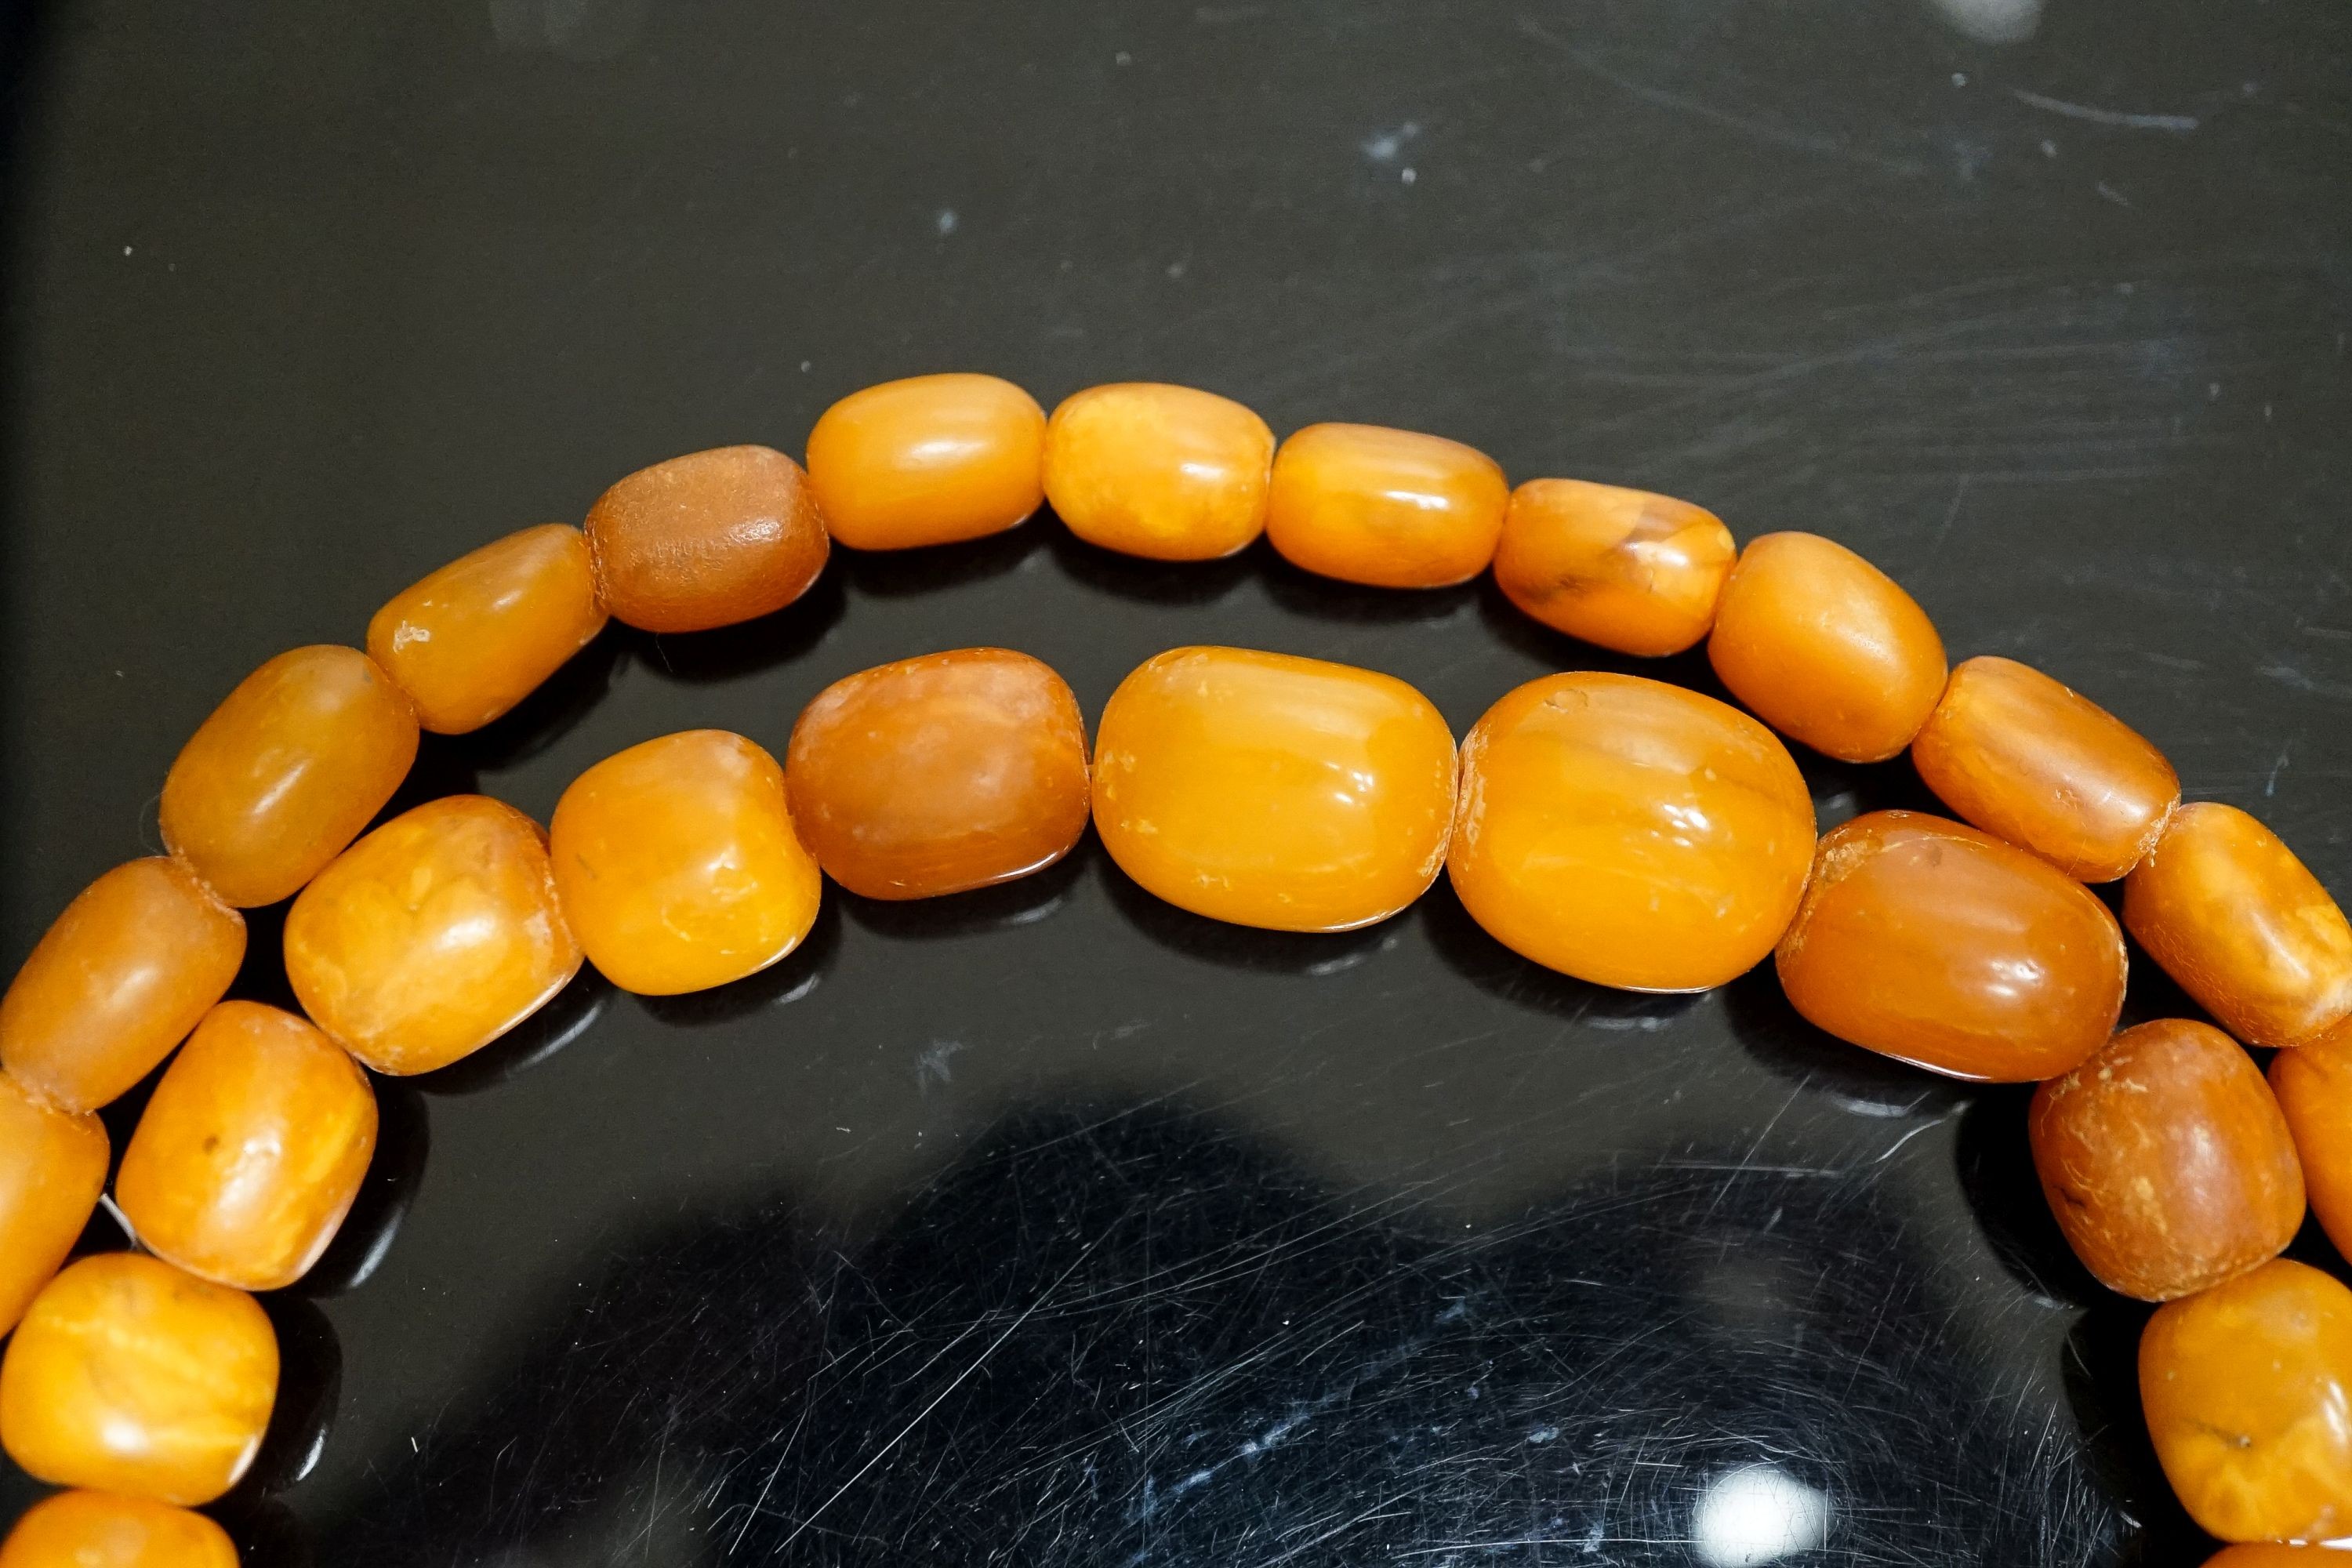 A single strand amber bead necklace, 82cm, gross 69 grams.